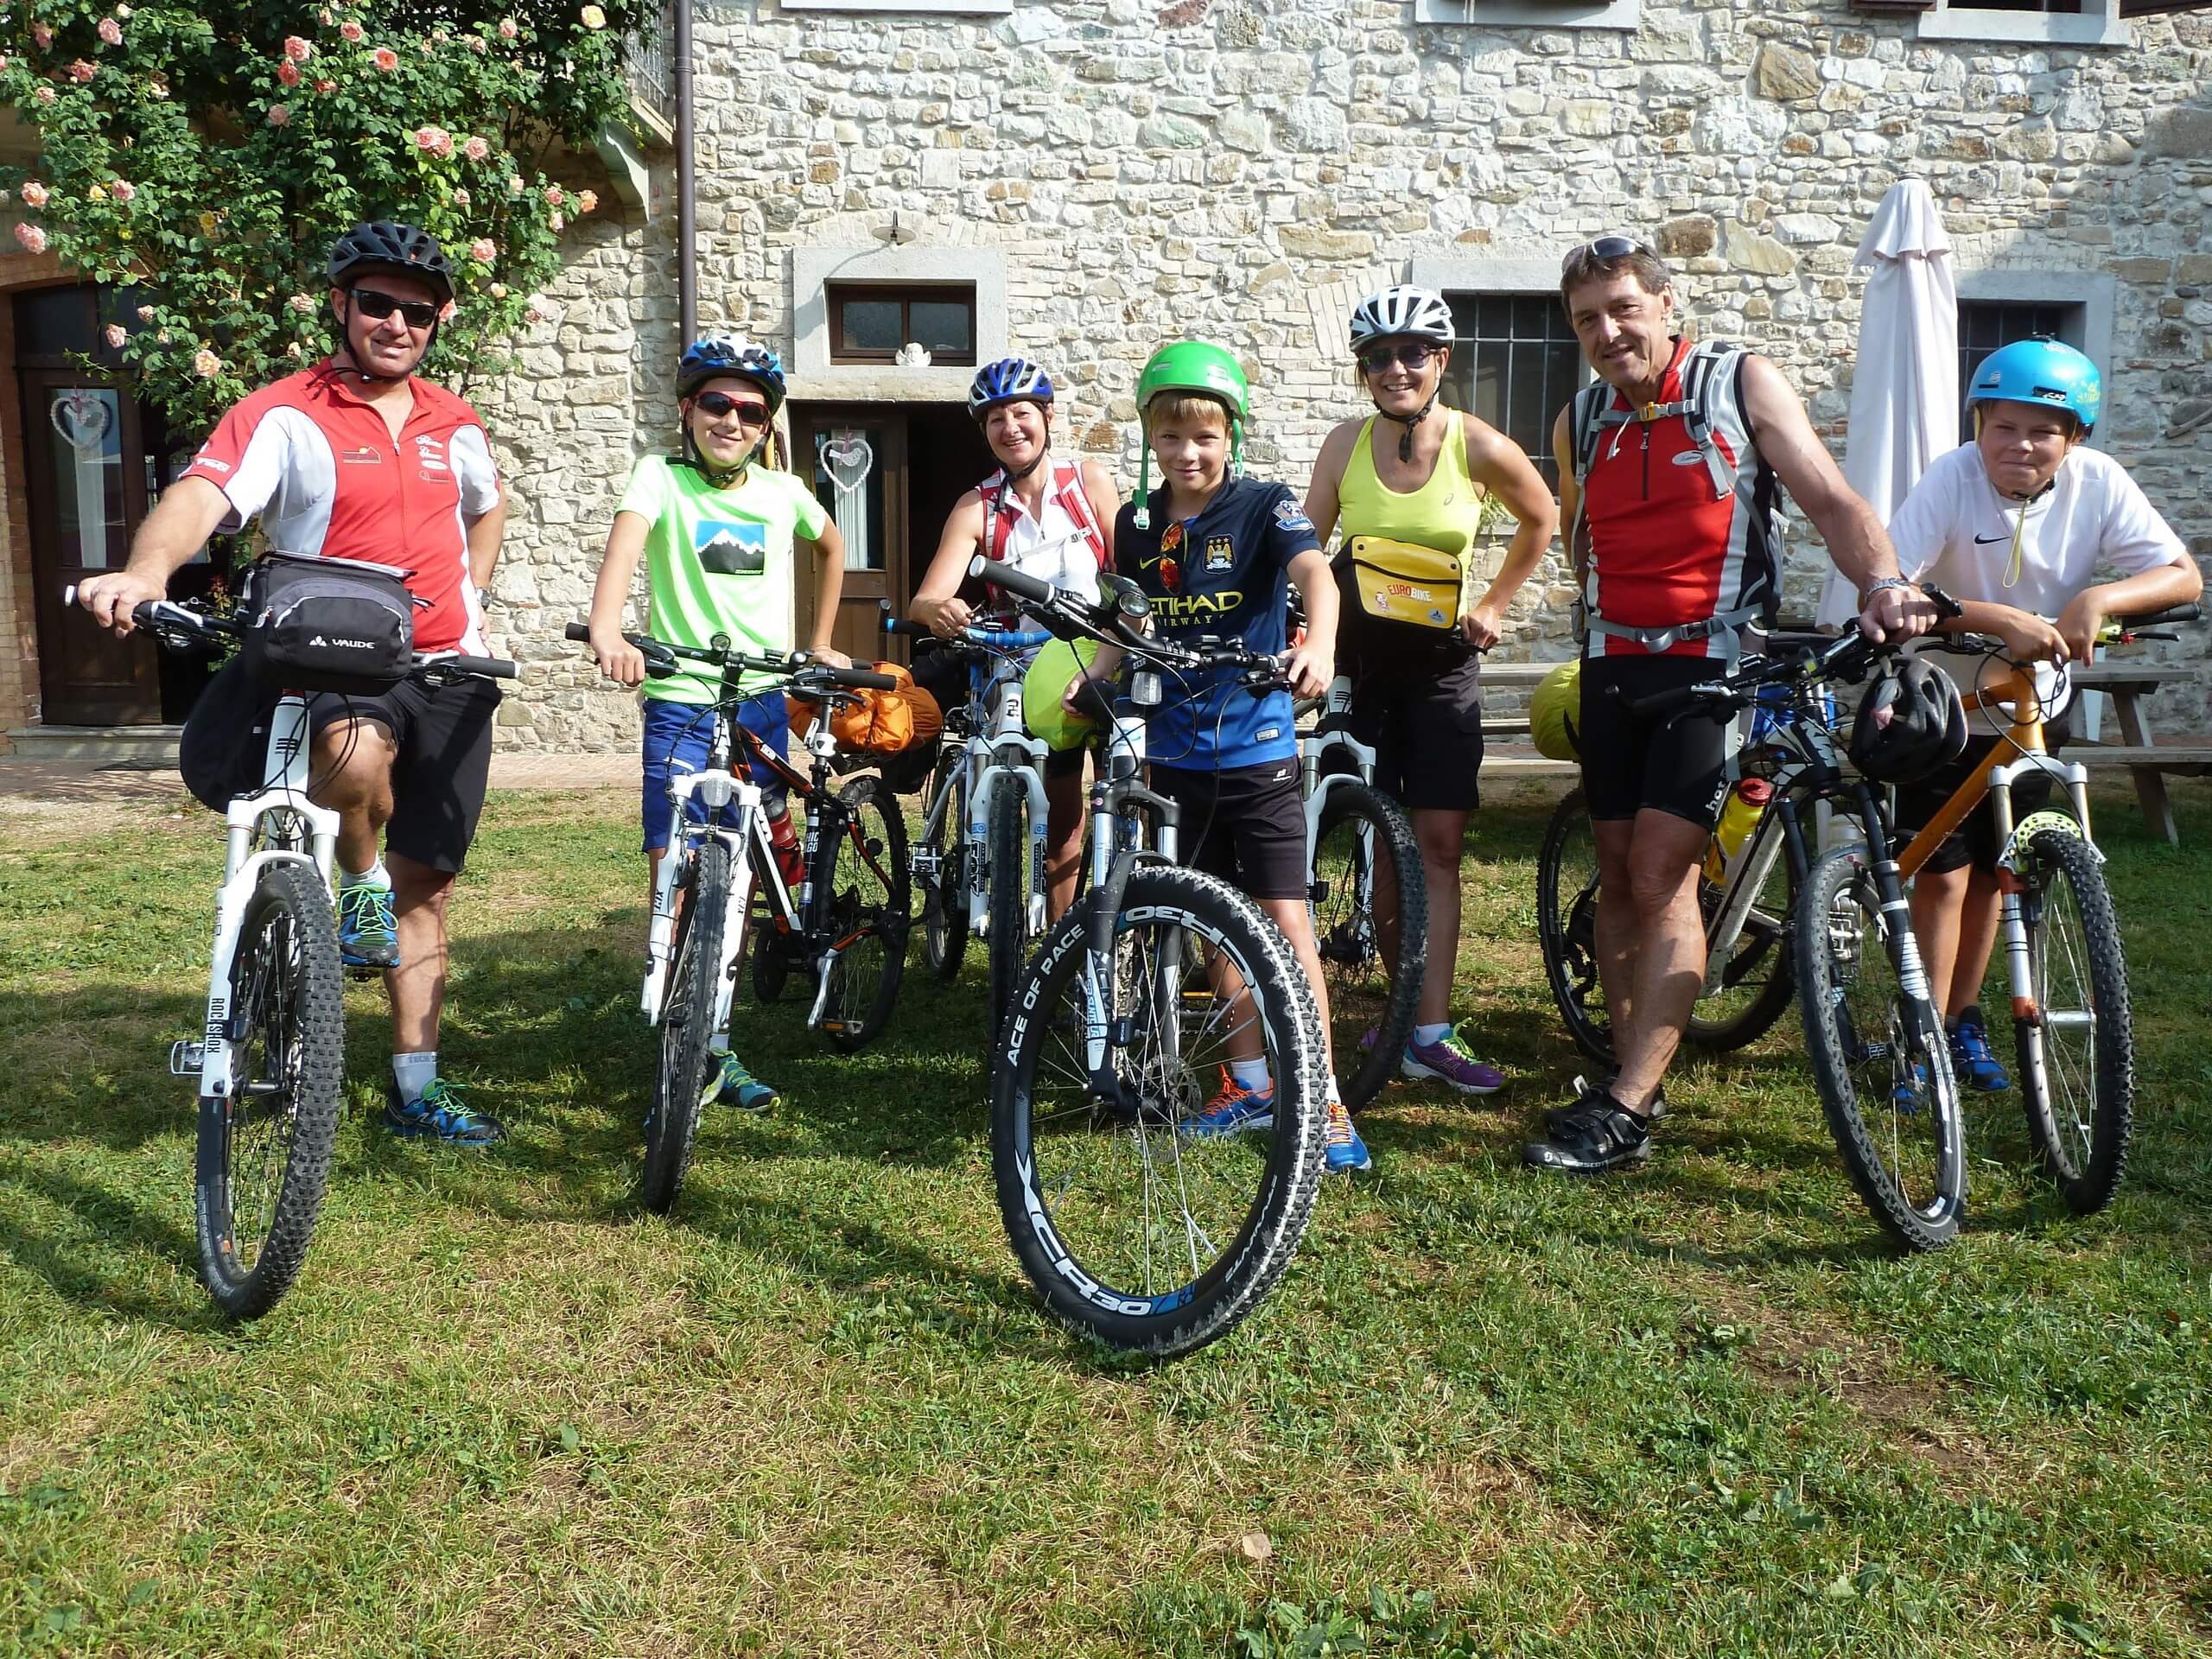 Group of bikers on South Tyrol in Italy